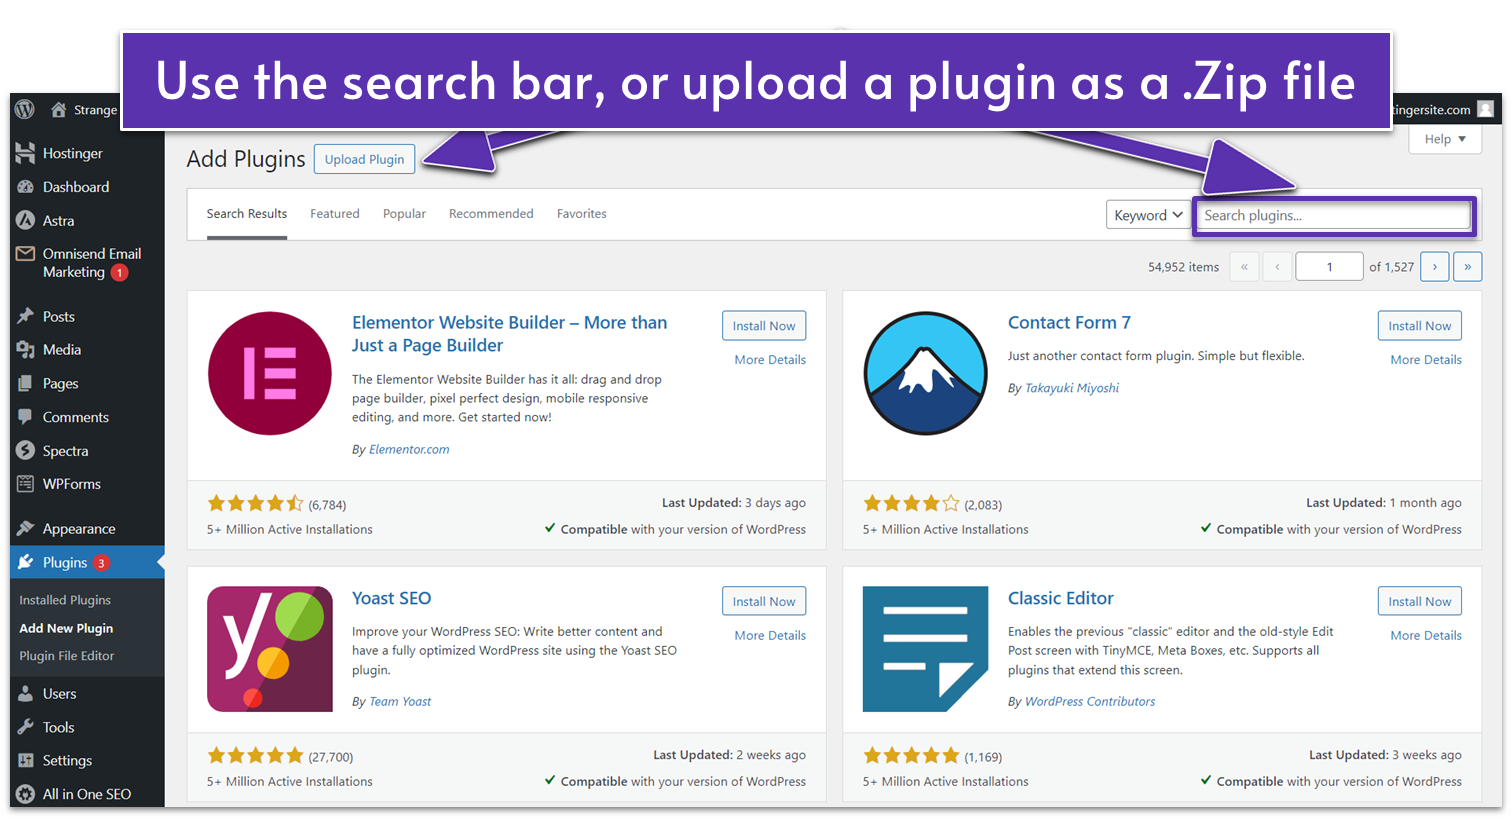 Searching for plugins in WordPress